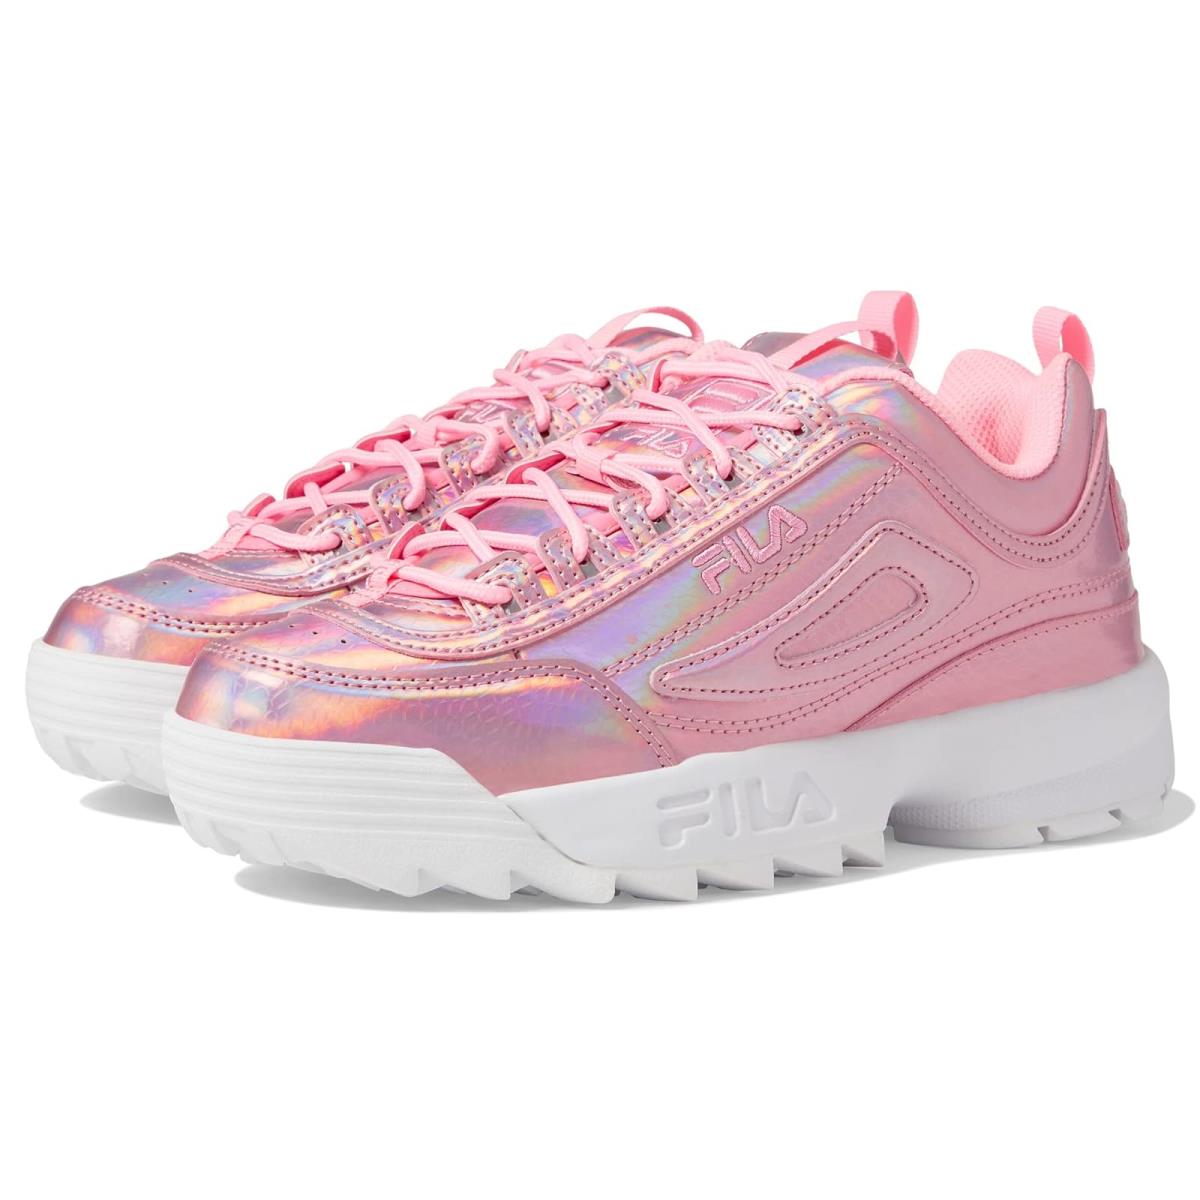 Woman`s Sneakers Athletic Shoes Fila Disruptor II Premium Iri Snake Cotton Candy/White/Cotton Candy